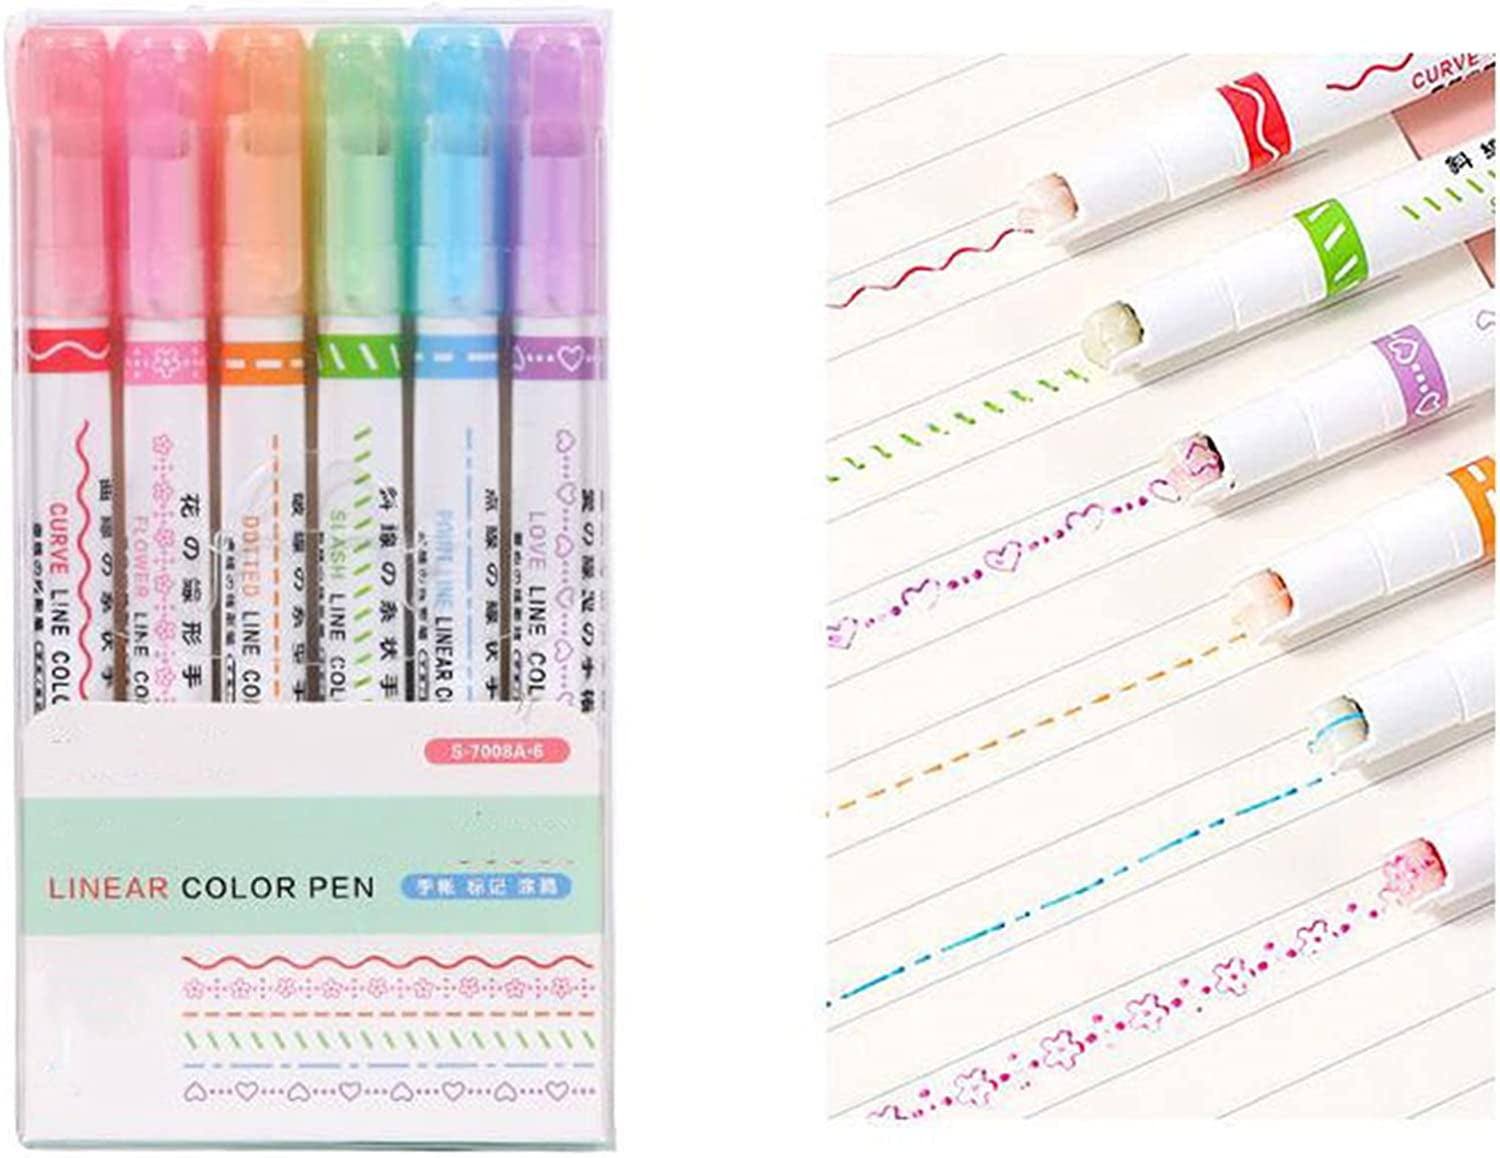 AECHY 8PCS Curve Highlighter Pen Set, Dual Tip Marker Pens with 6 Different  Curve Shapes & 8 Colors Mark Lines, Aesthetic Curve Marker Highlighter for  Journal Planner School Supplies - Yahoo Shopping